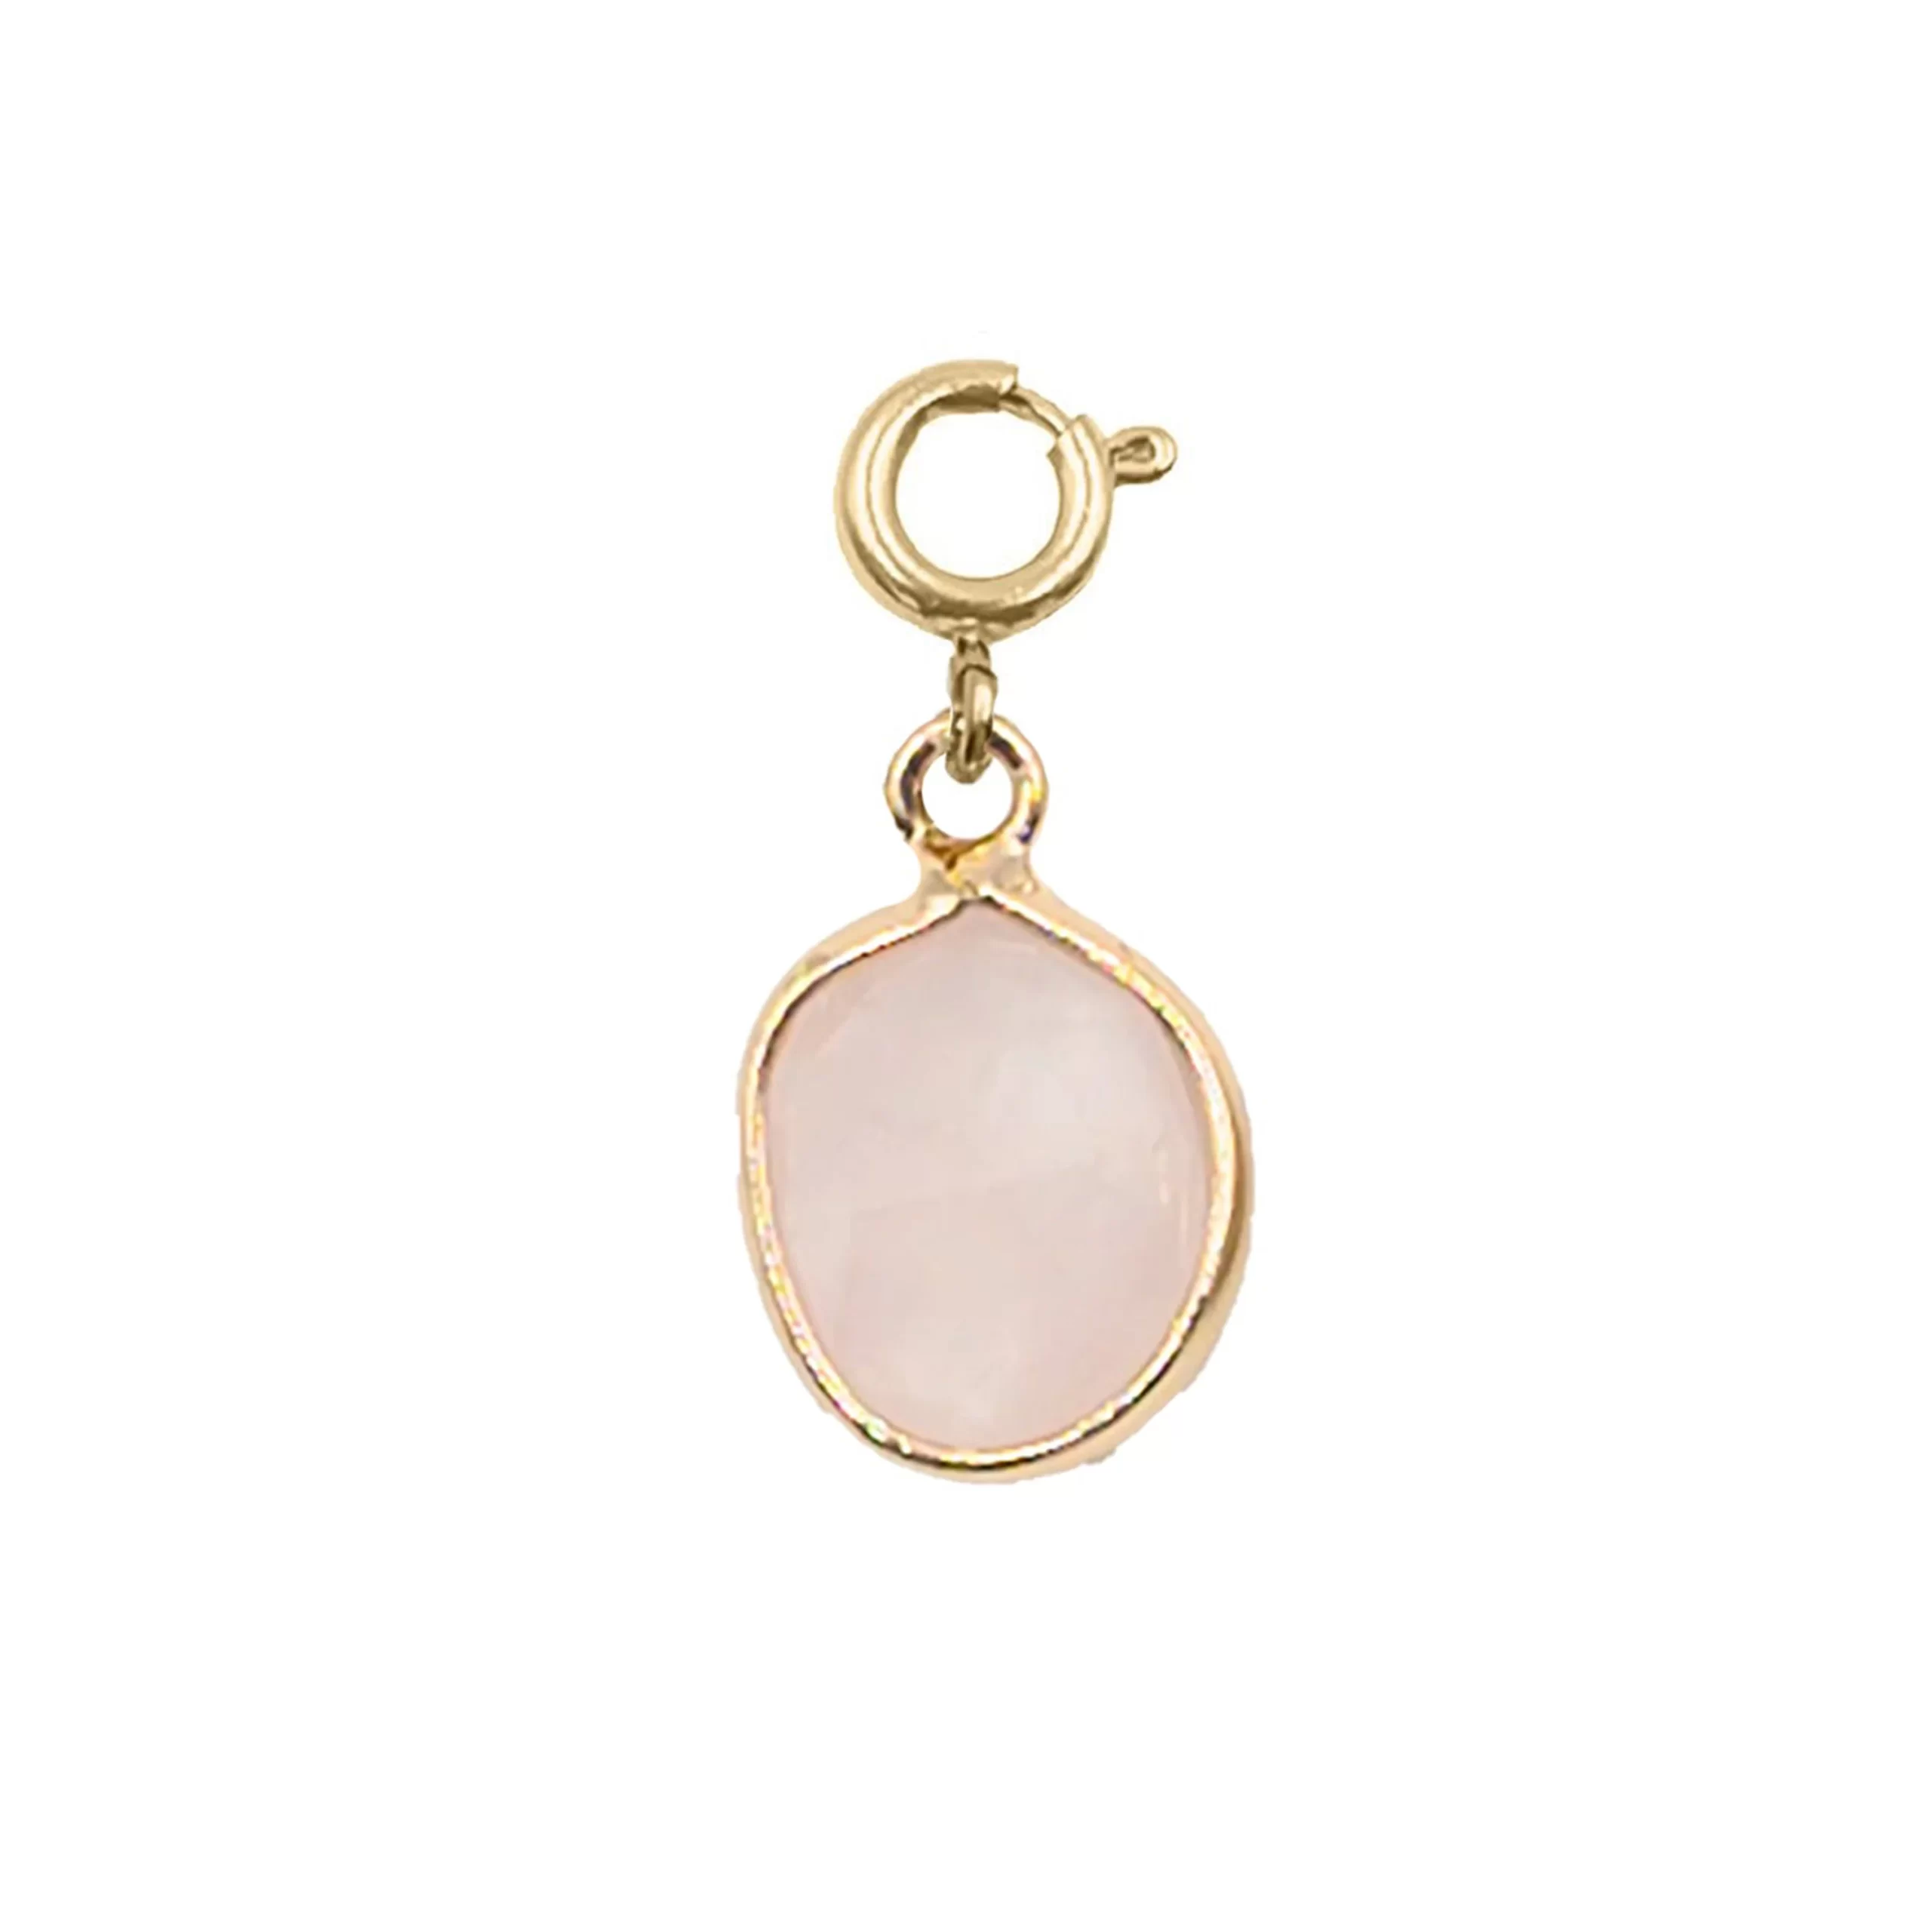 BALLET OVAL CHARM